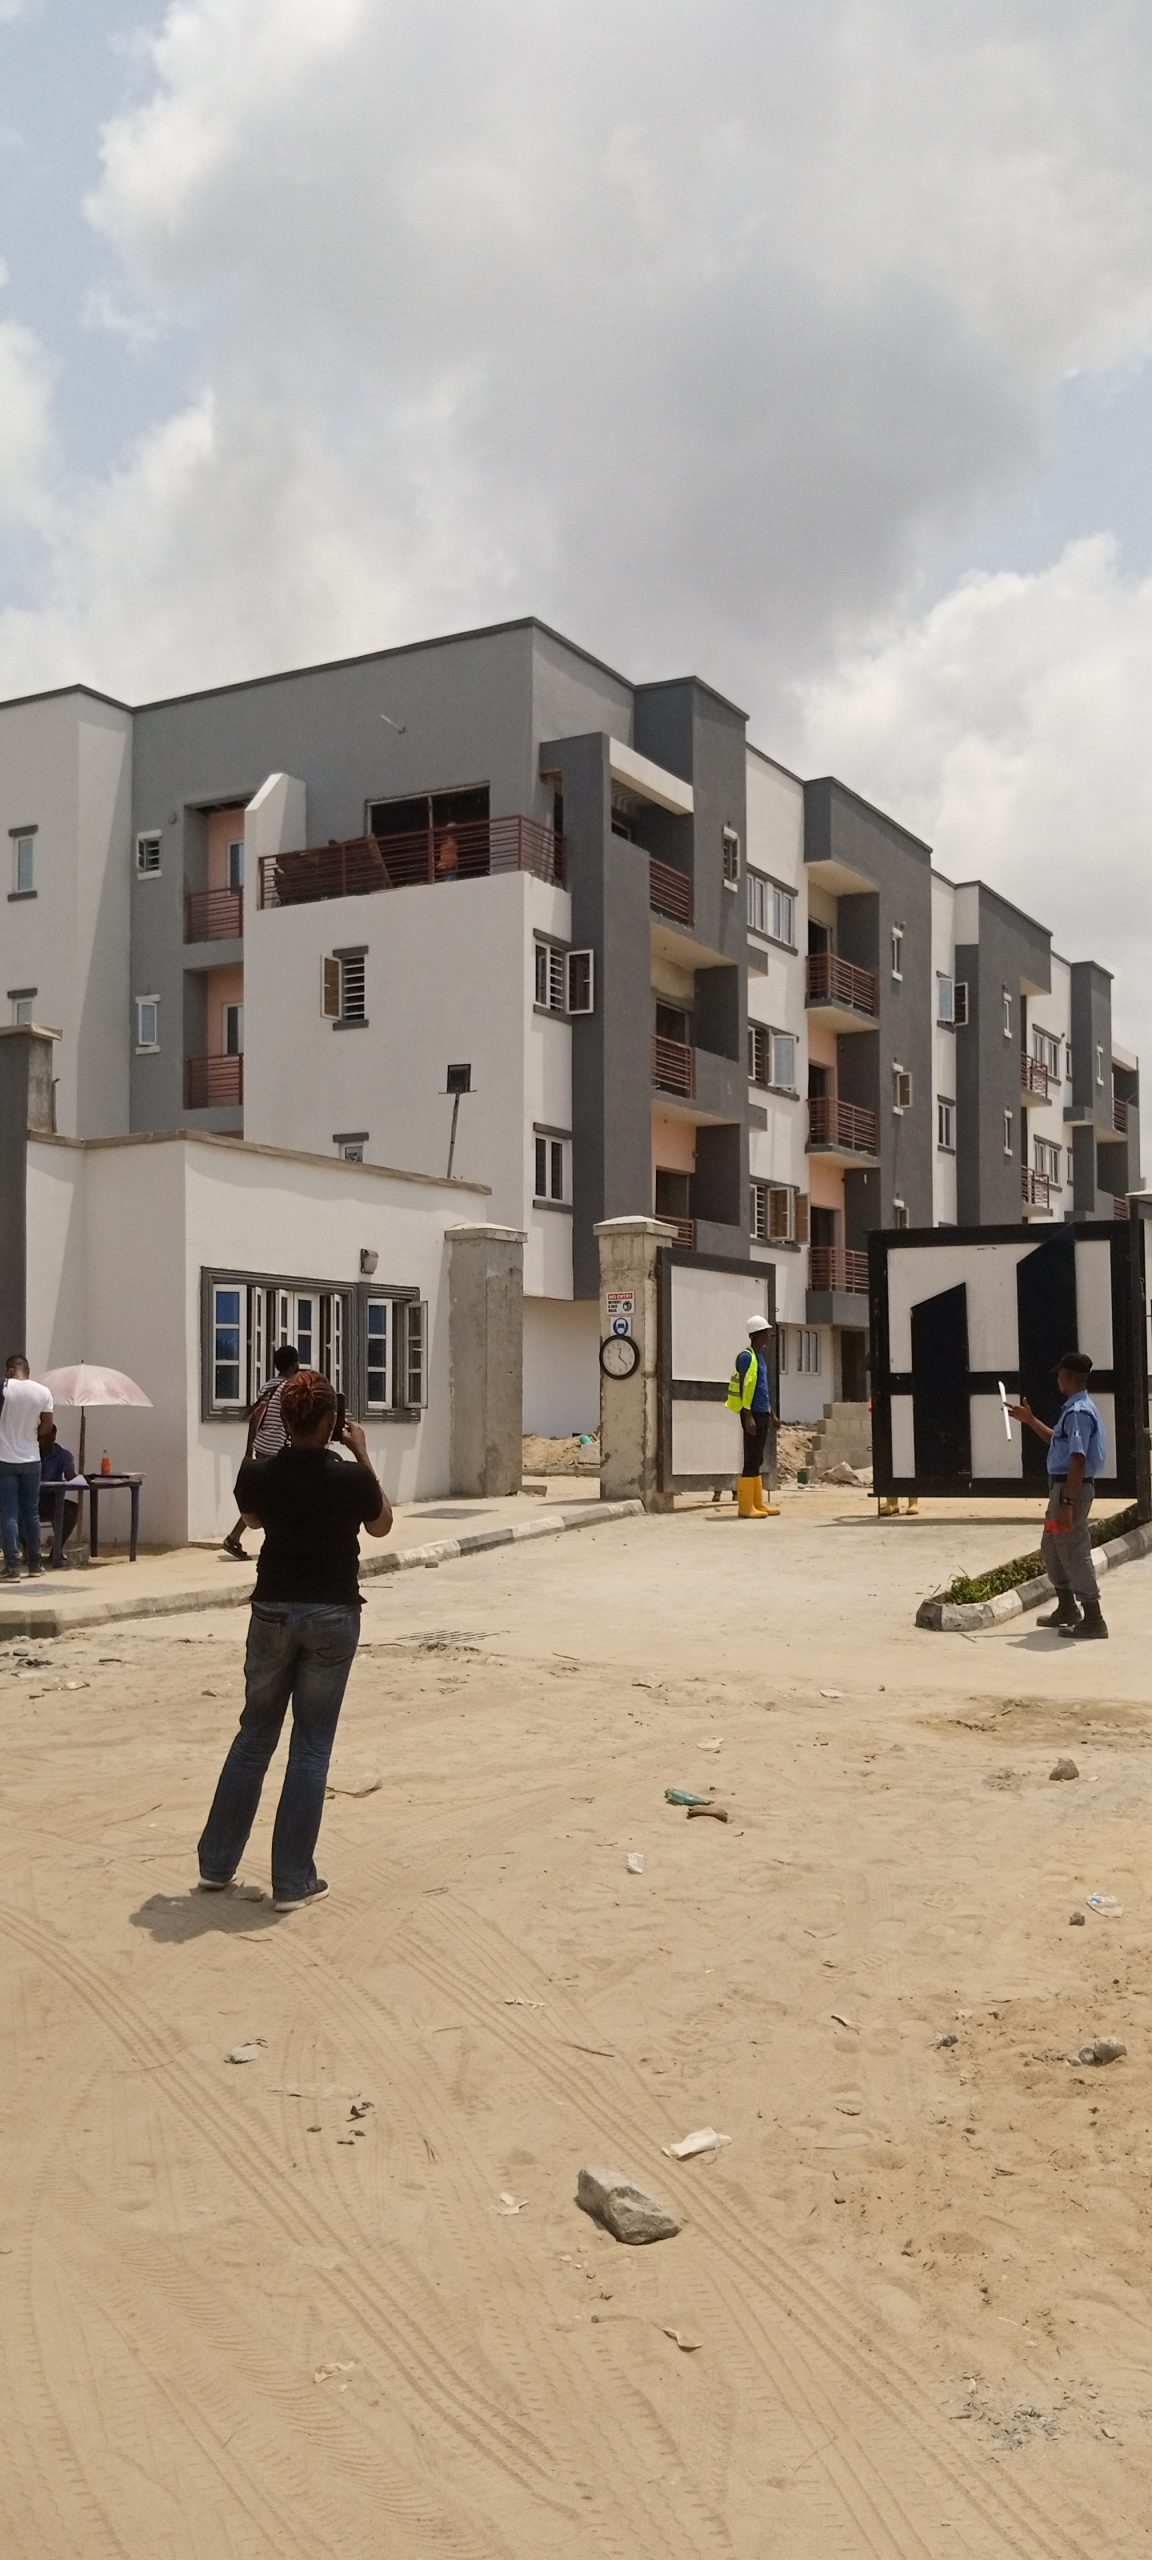 Buy 1, 2 & 3 Bedroom Serviced Apartments at Fairfiled Apartments, Abijo, Ajah, Lagos with 12 months installment